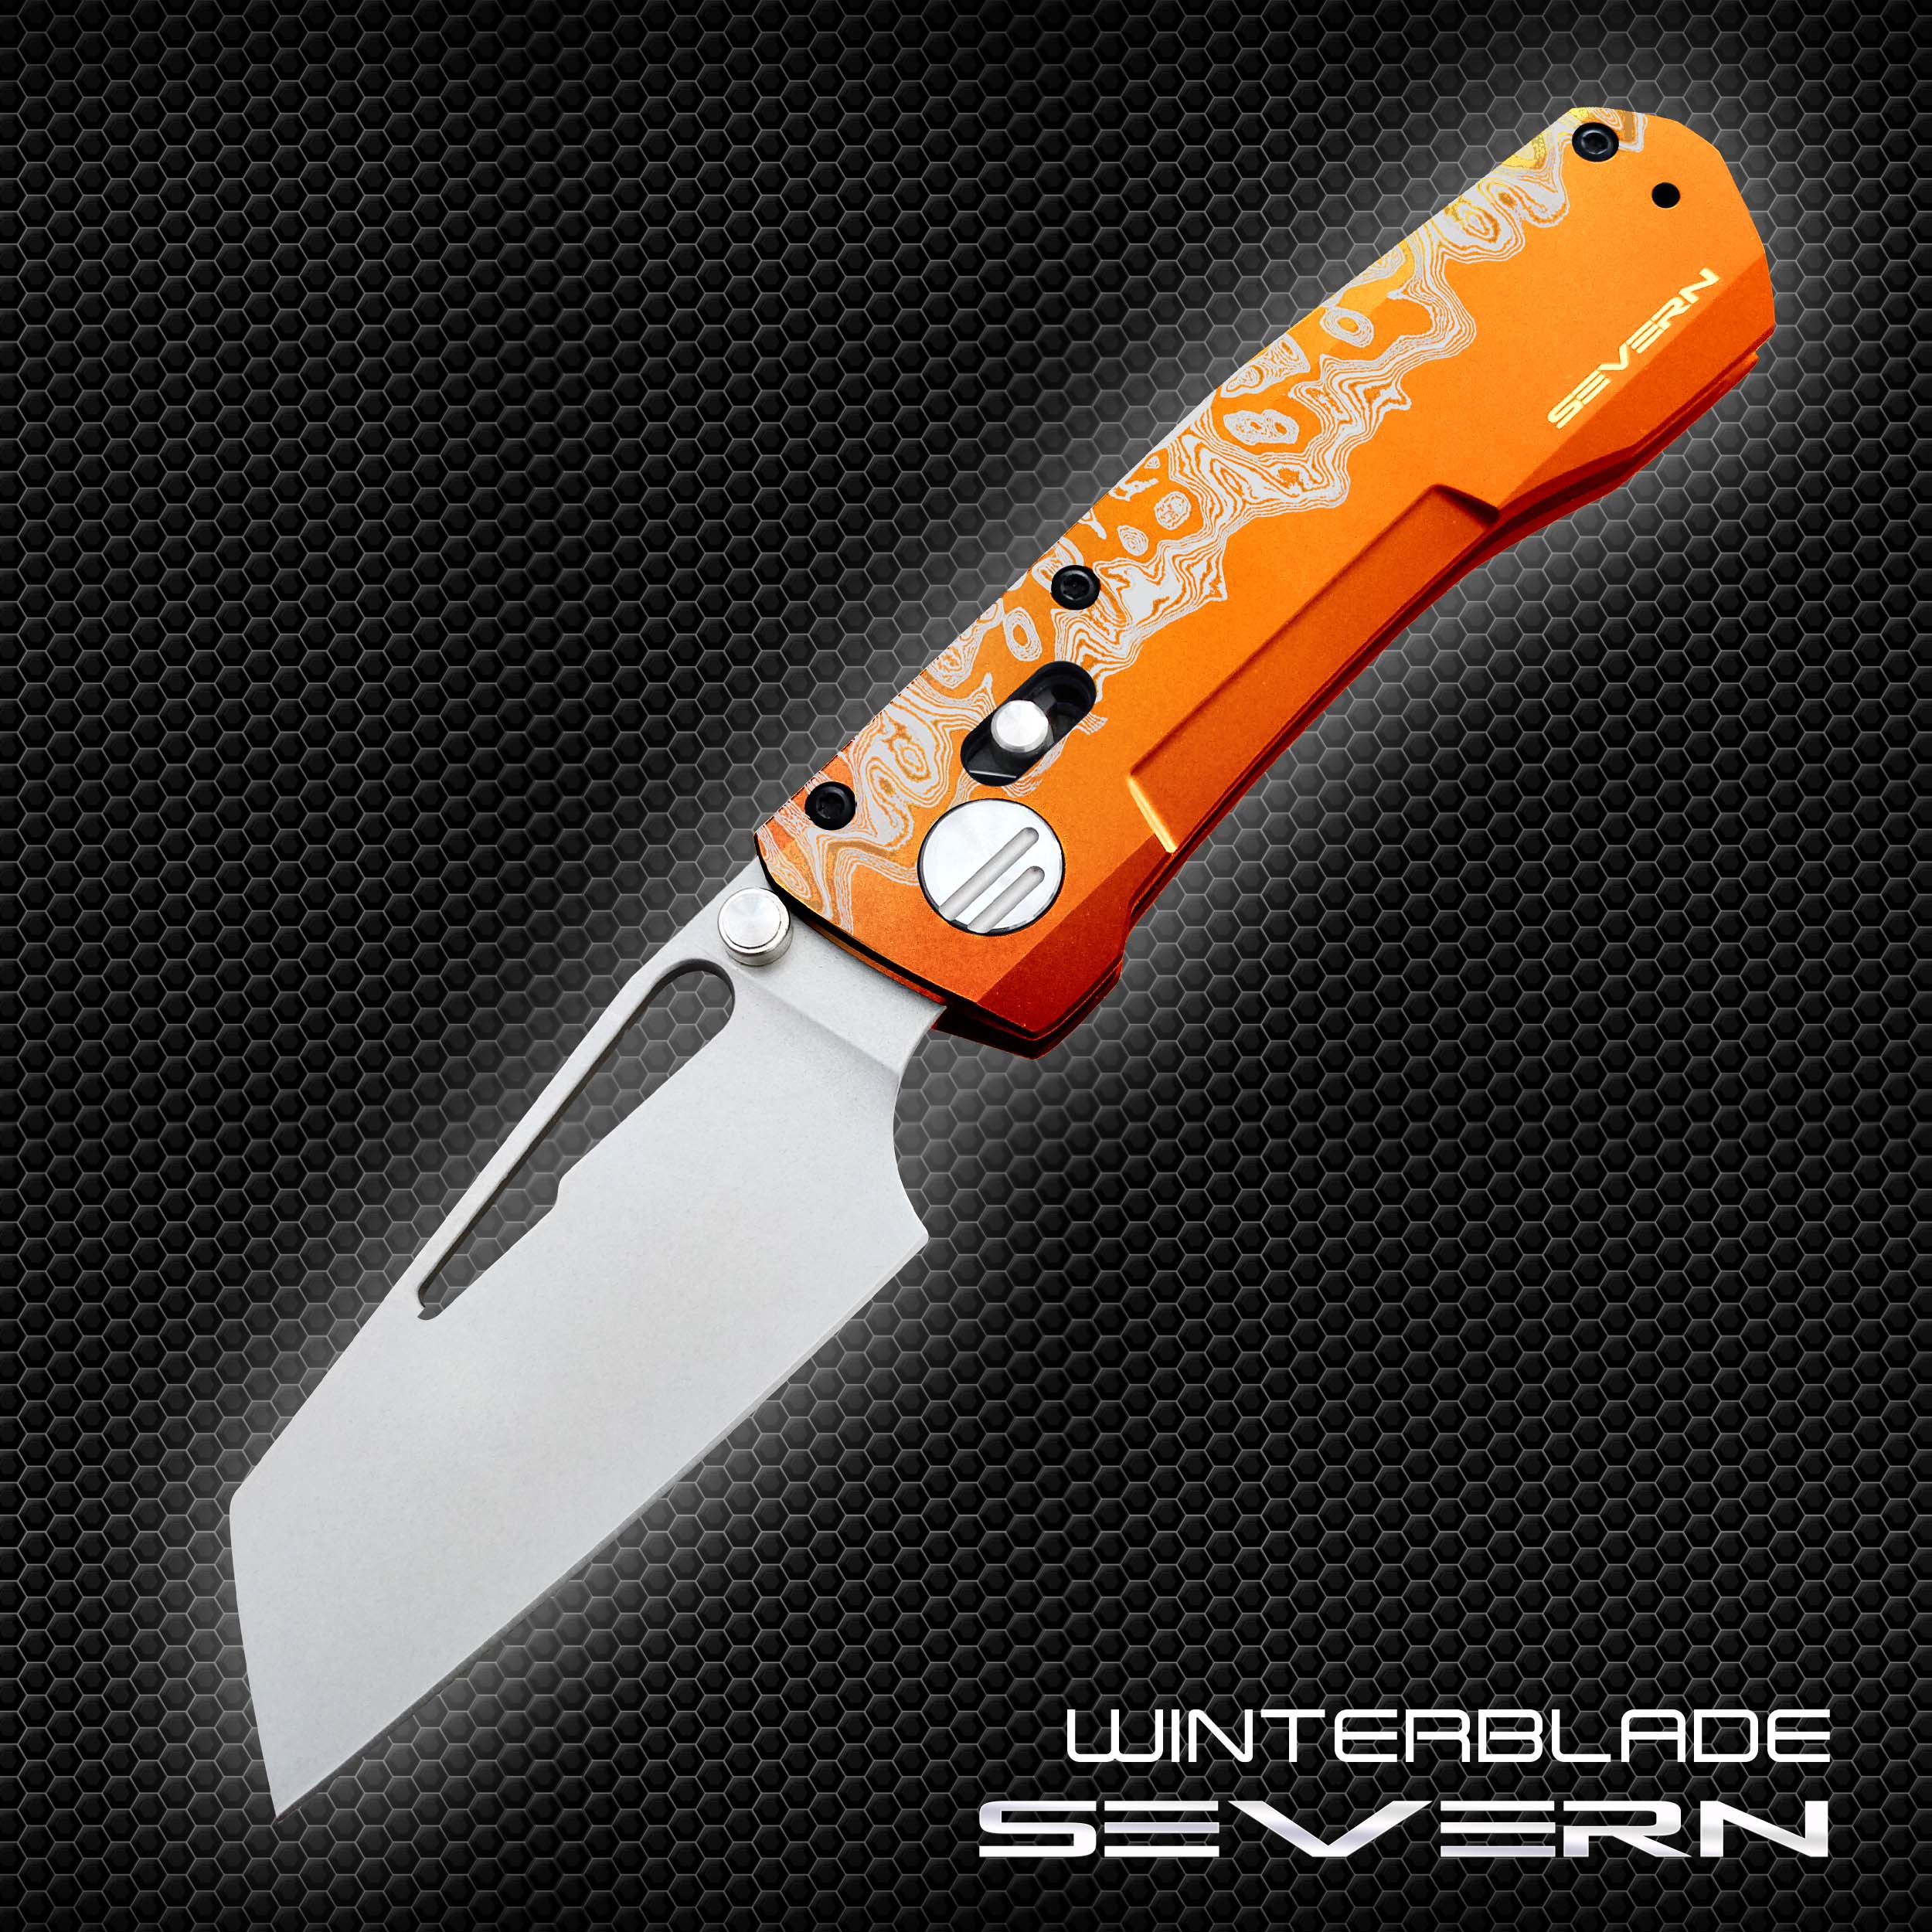 SEVERN COLLECTOR’S EDITION (PREORDER) - ORANGE 7075 ALUMINUM “LASER WAVE” + STONEWASHED MAGNACUT - ONLY 200 WILL EVER BE RELEASED!